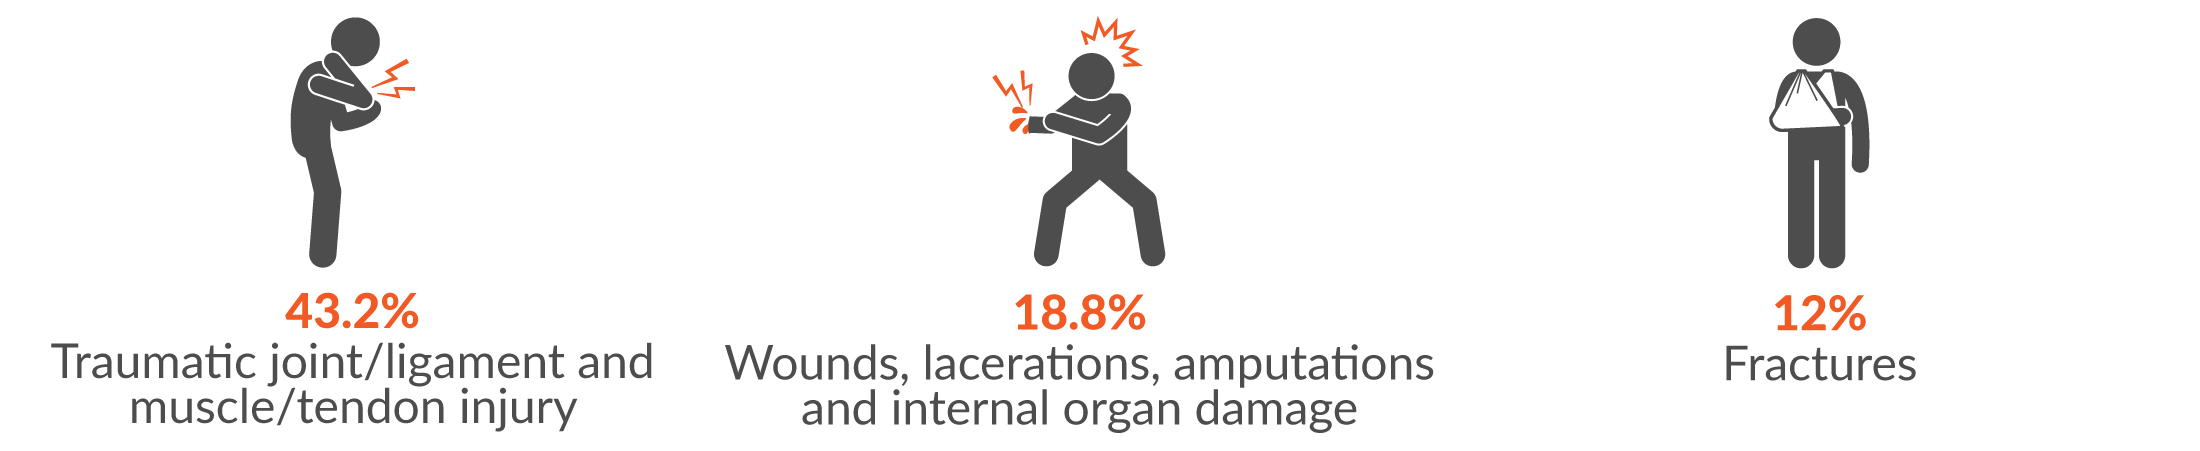 This infographic shows the main three mechanisms for serious injuries were 27.8% body stressing; 27% being hit by moving objects; and 22.5% falls, trips and slips of a person.